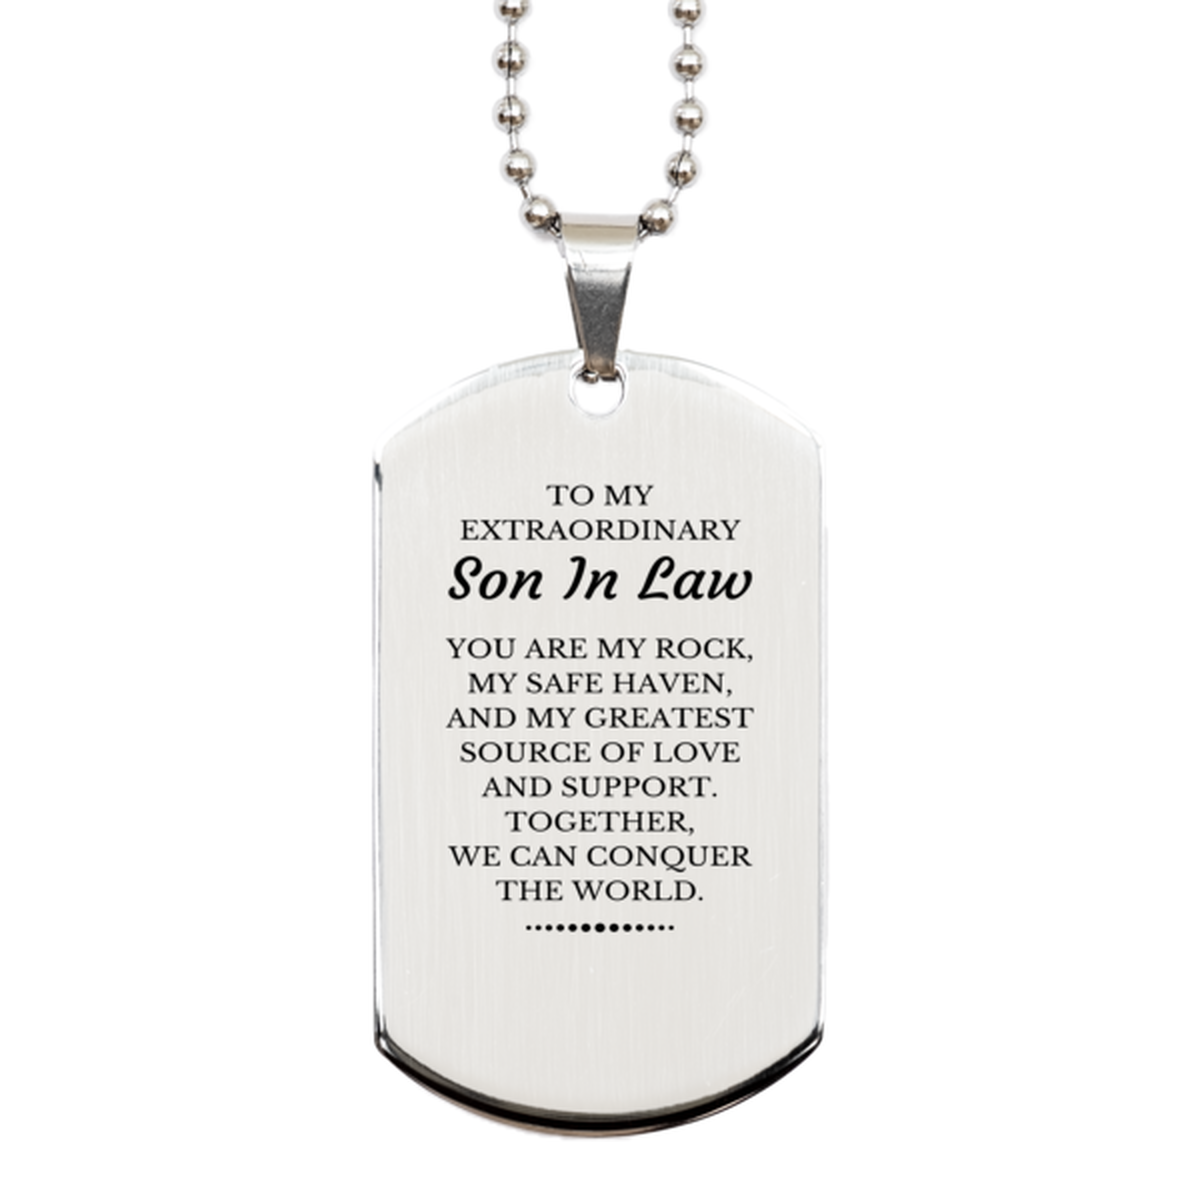 To My Extraordinary Son In Law Gifts, Together, we can conquer the world, Birthday Silver Dog Tag For Son In Law, Christmas Gifts For Son In Law